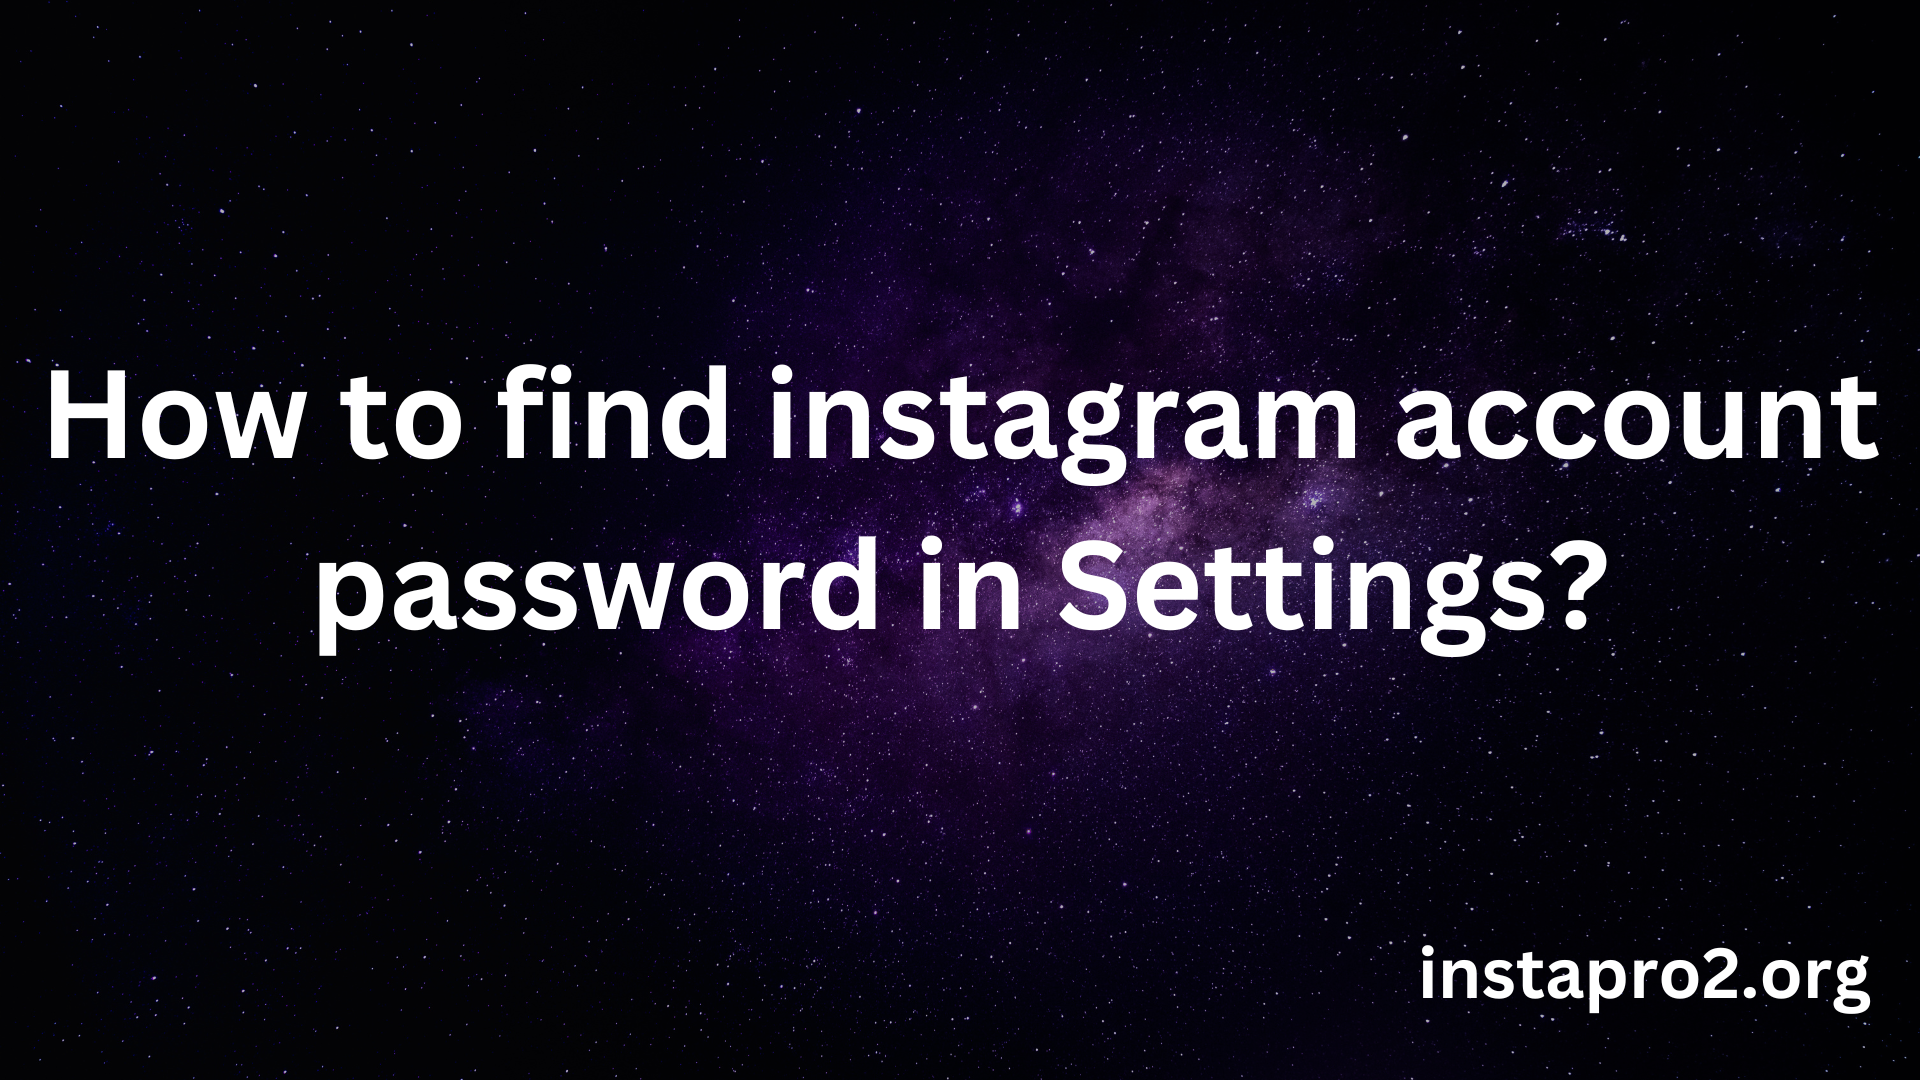 How to find instagram account password in Settings?